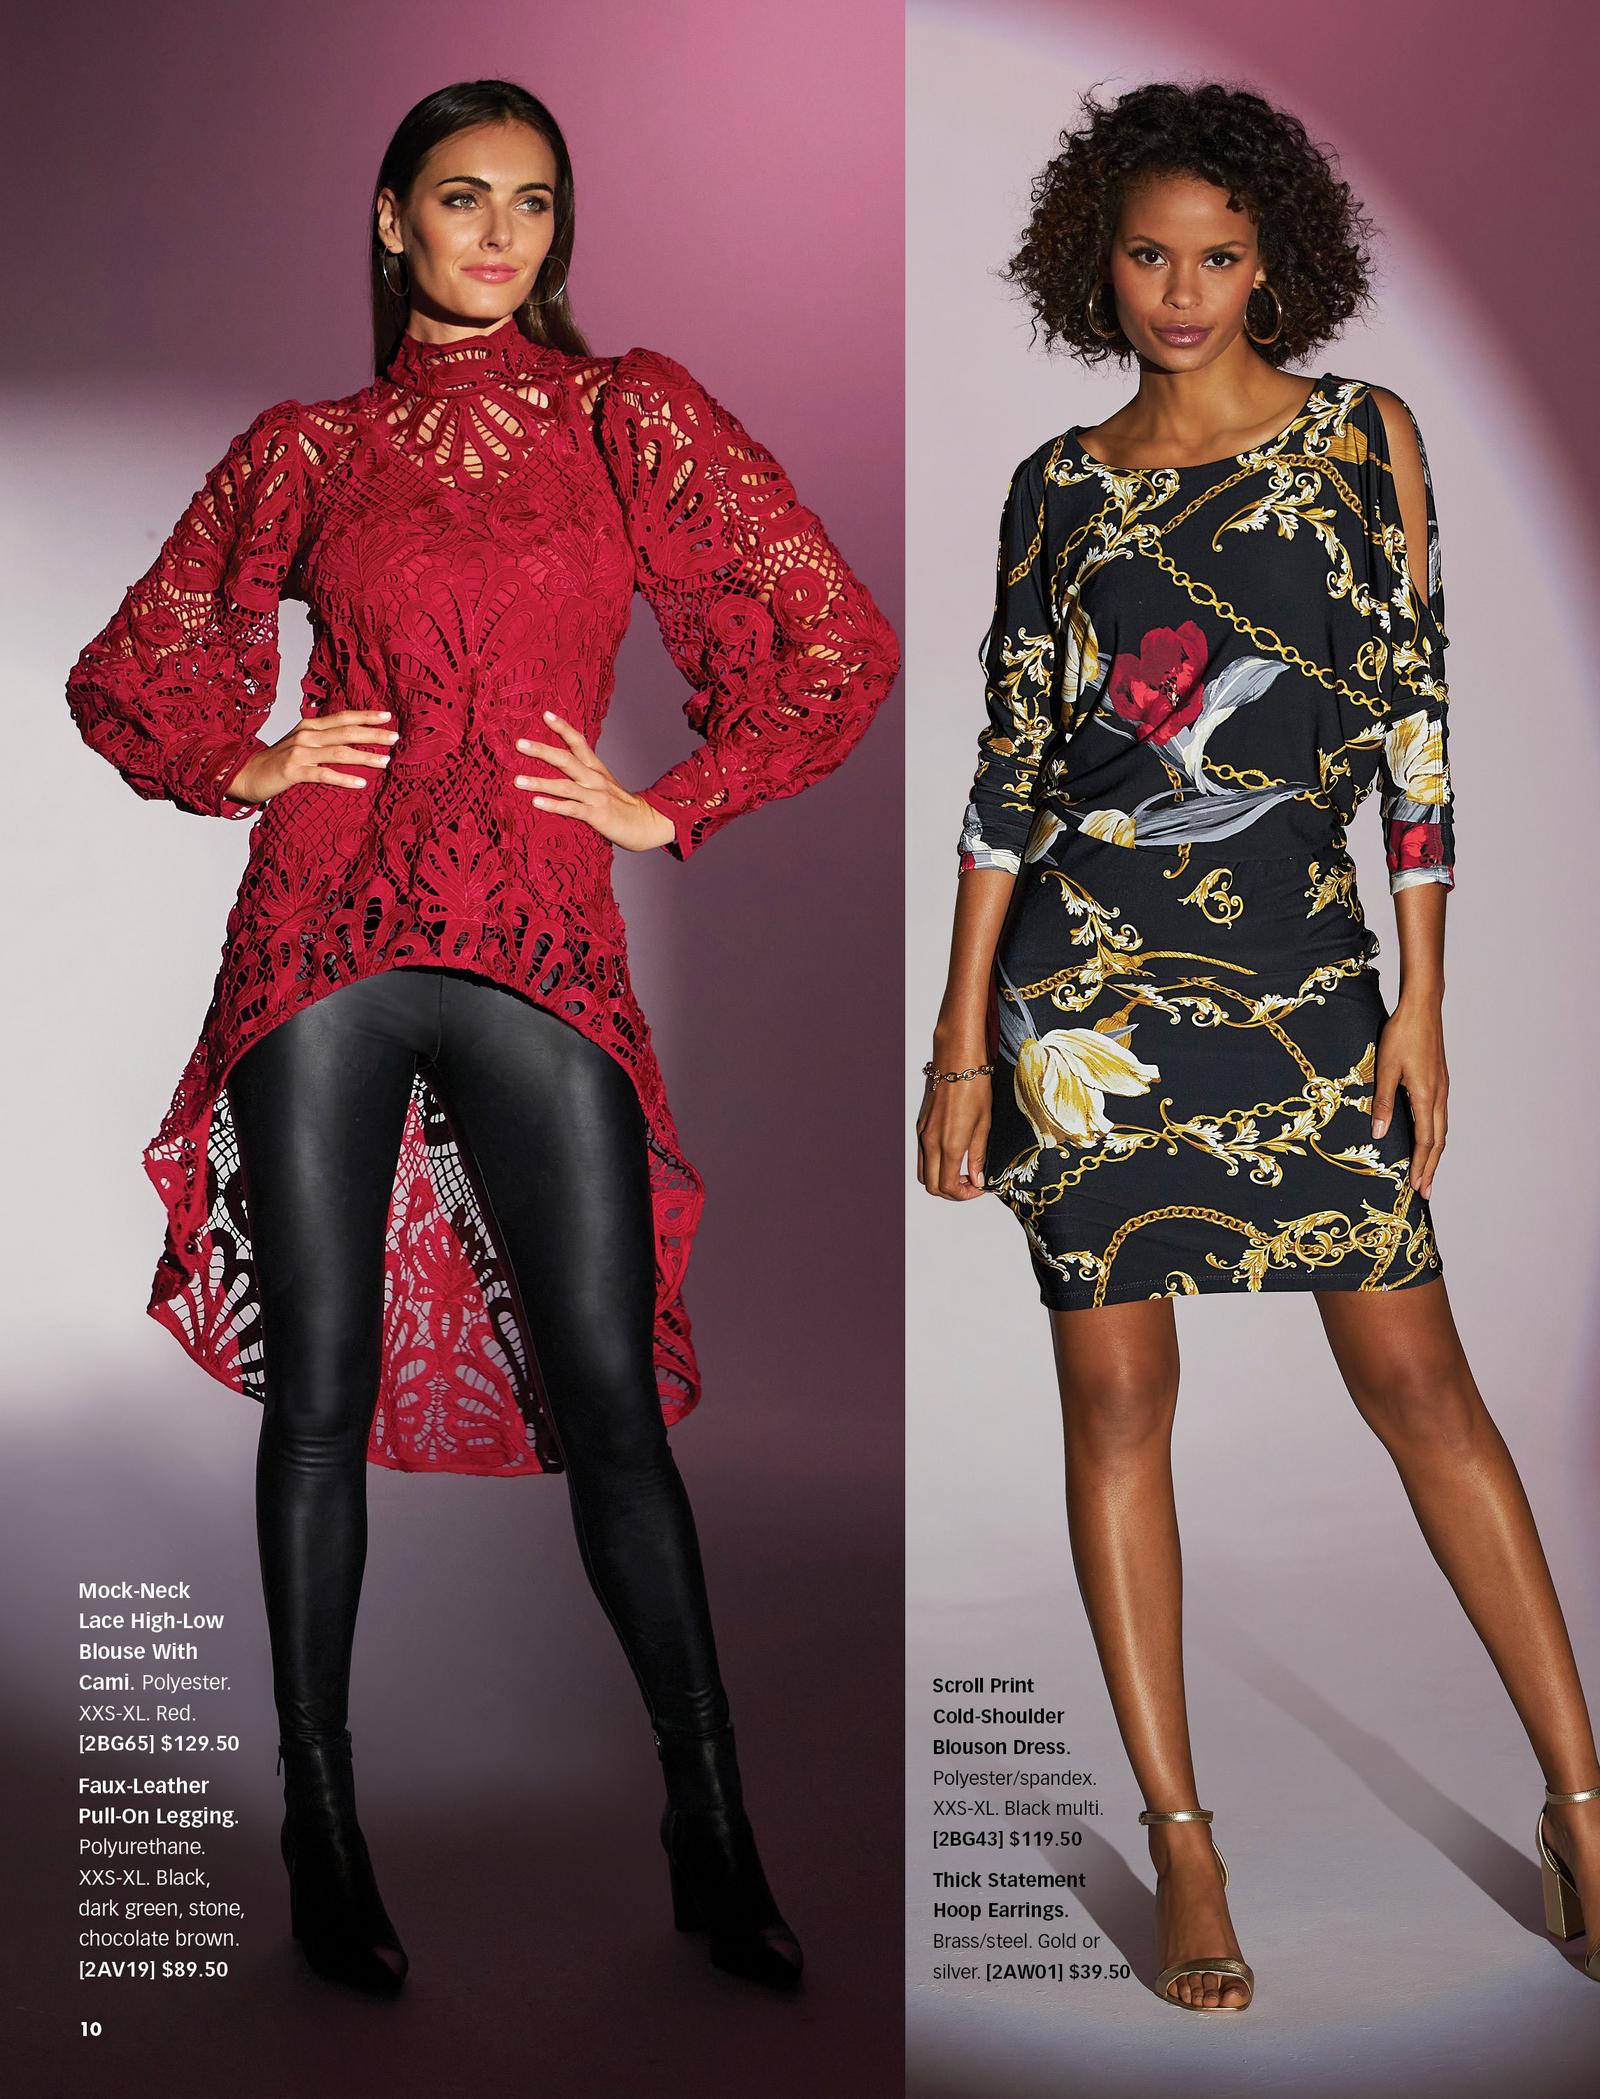 left model wearing a red lace high-low mock-neck top, black faux-leather leggings, and black leather booties. right model wearing a scroll print cold-shoulder blouson dress and gold hoop earrings.